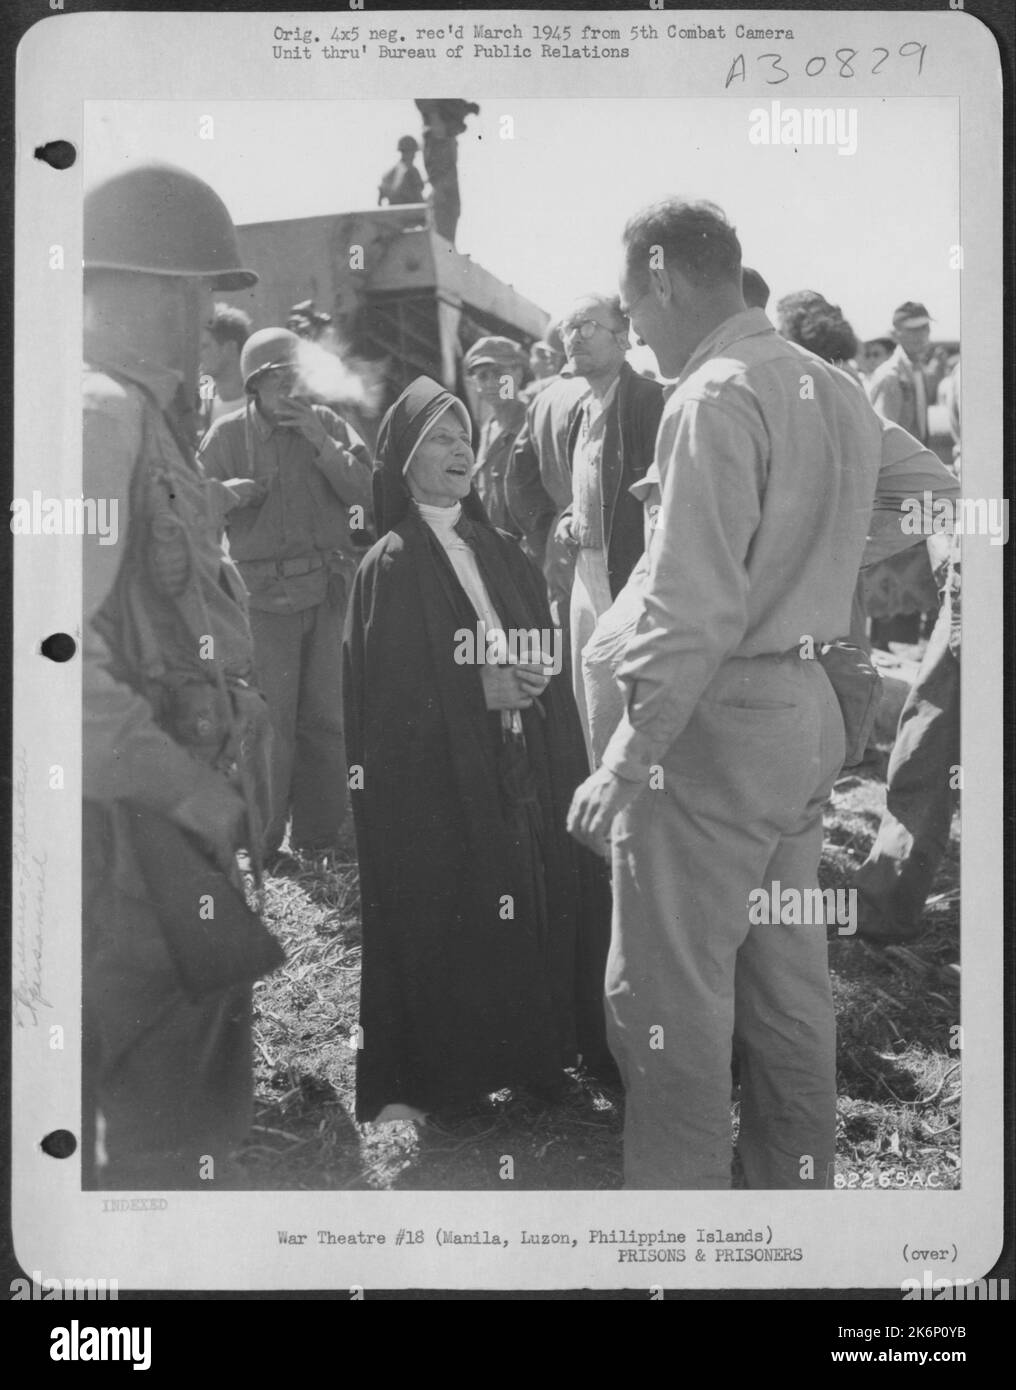 A Happy Nun, Sister Mary Alphonsa Held Prisoner By The Japs In Los